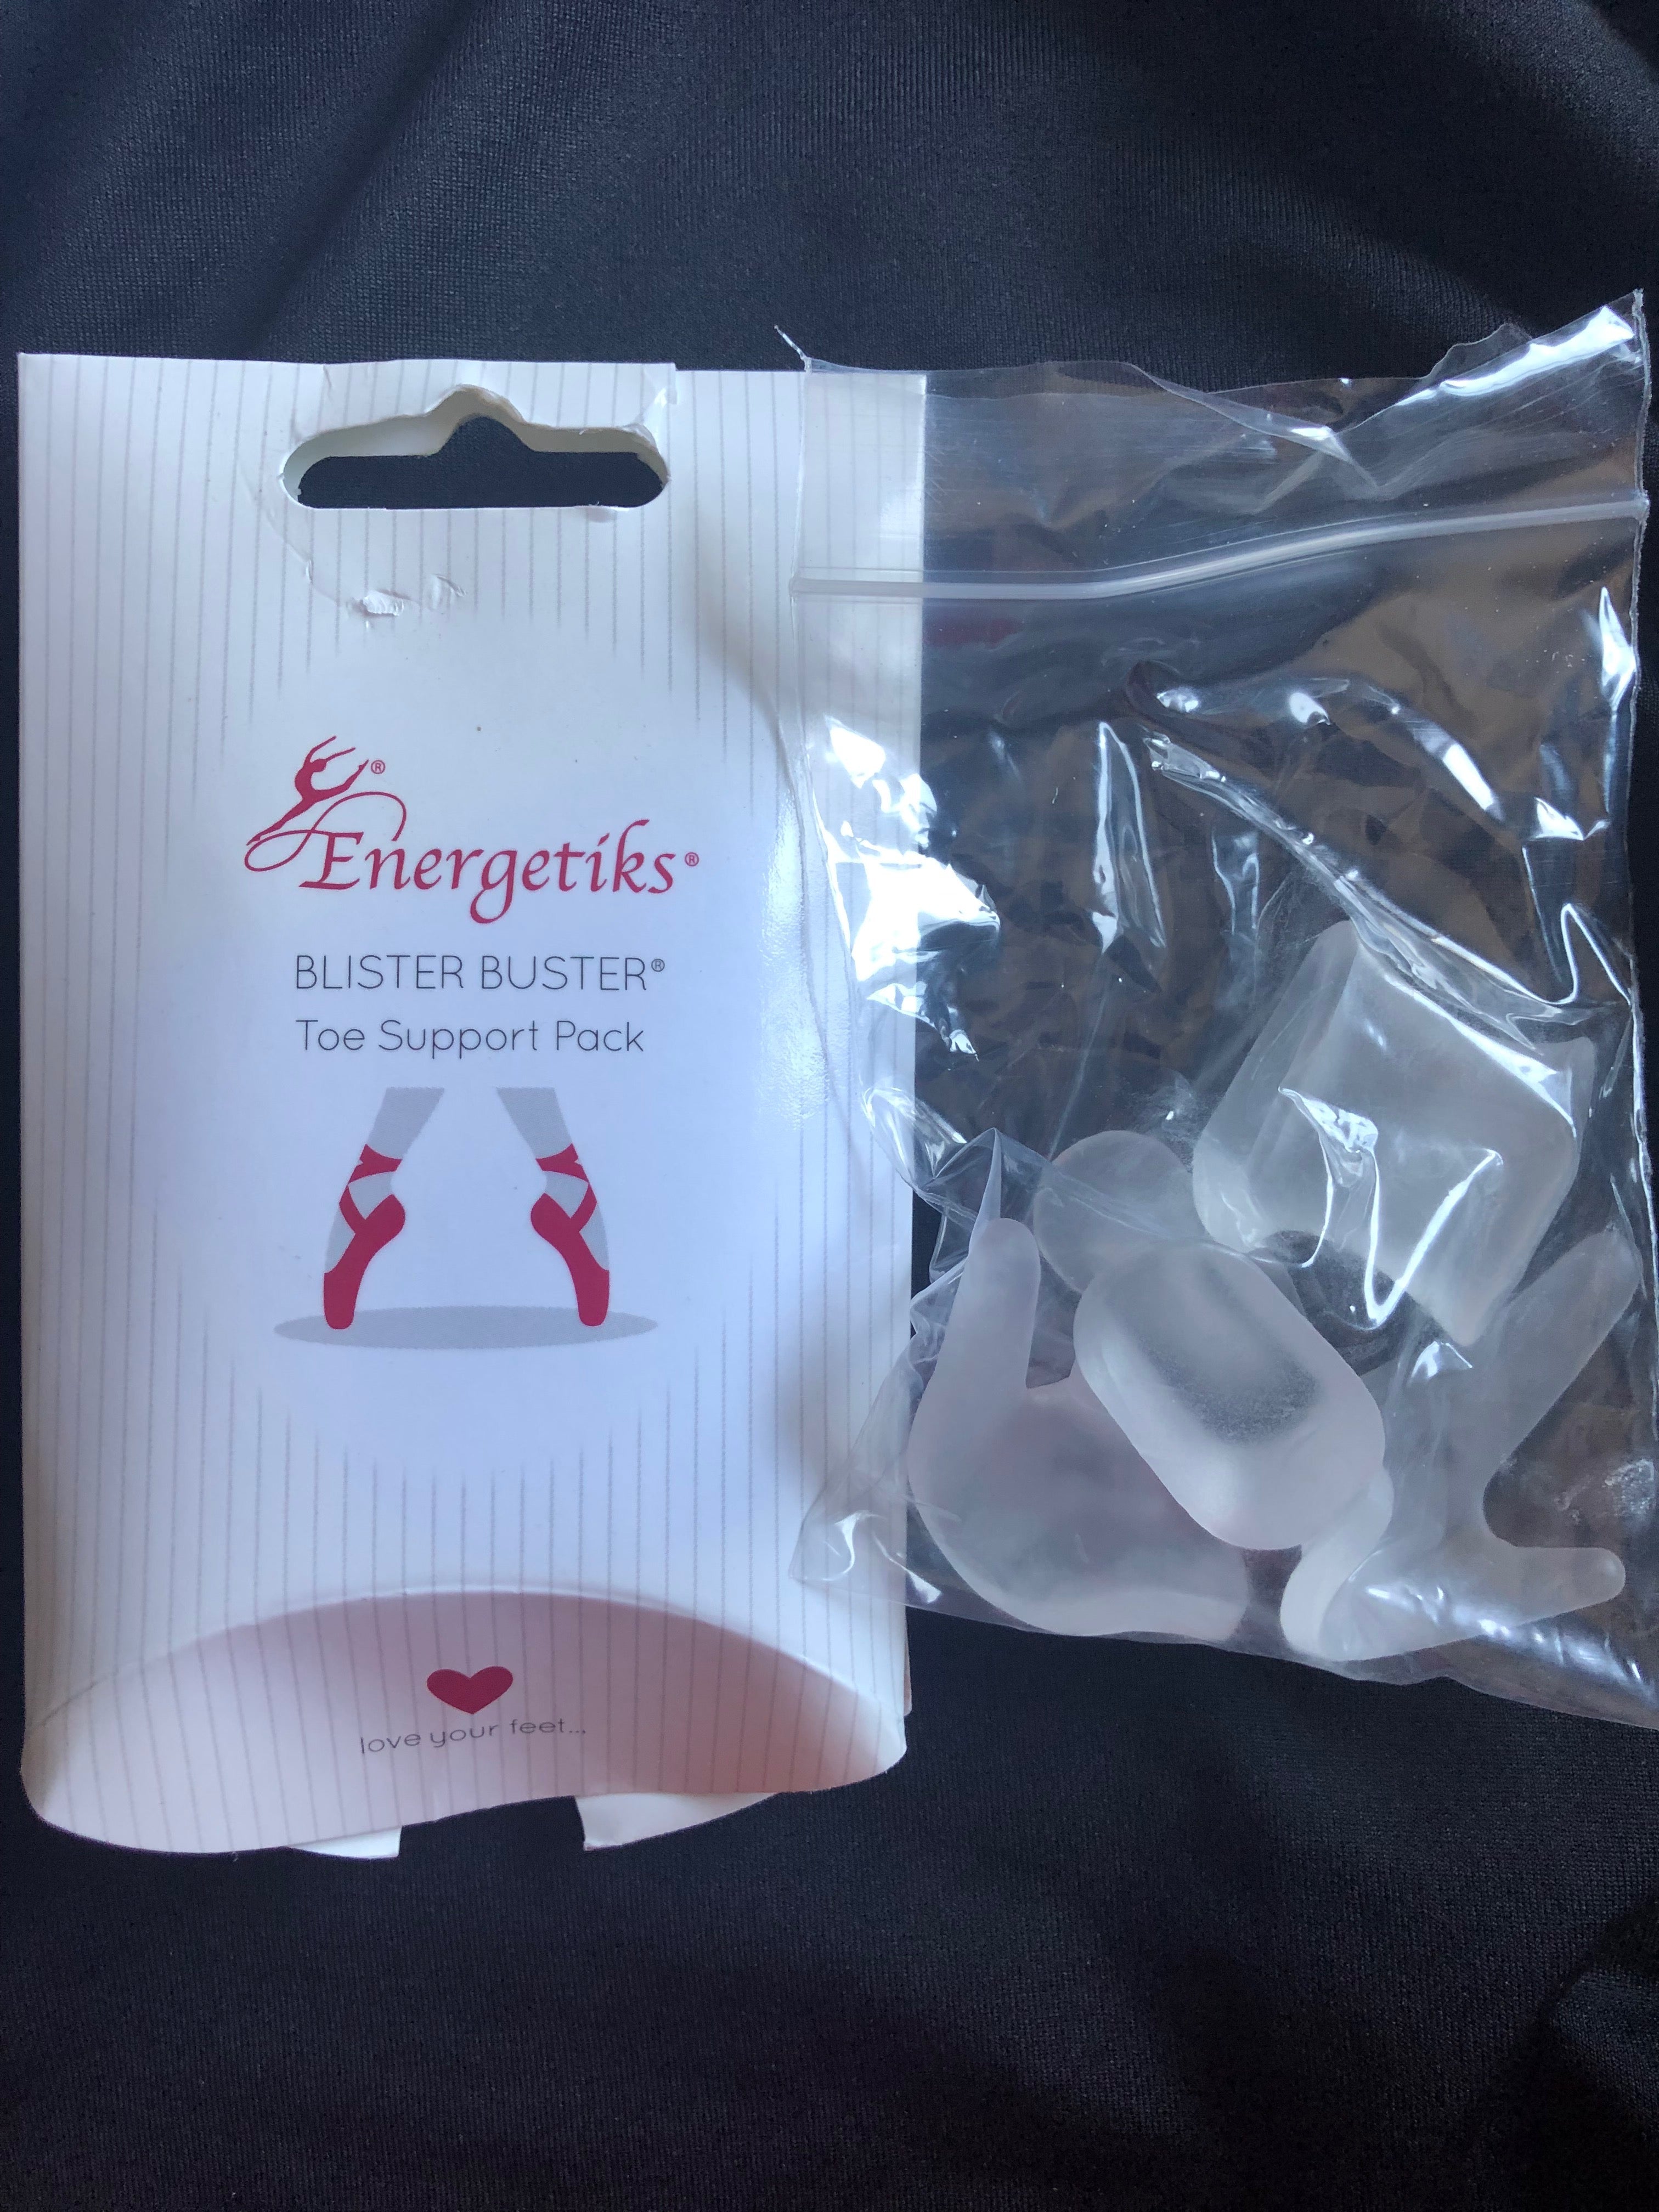 Energetiks Blister Buster toe support pack